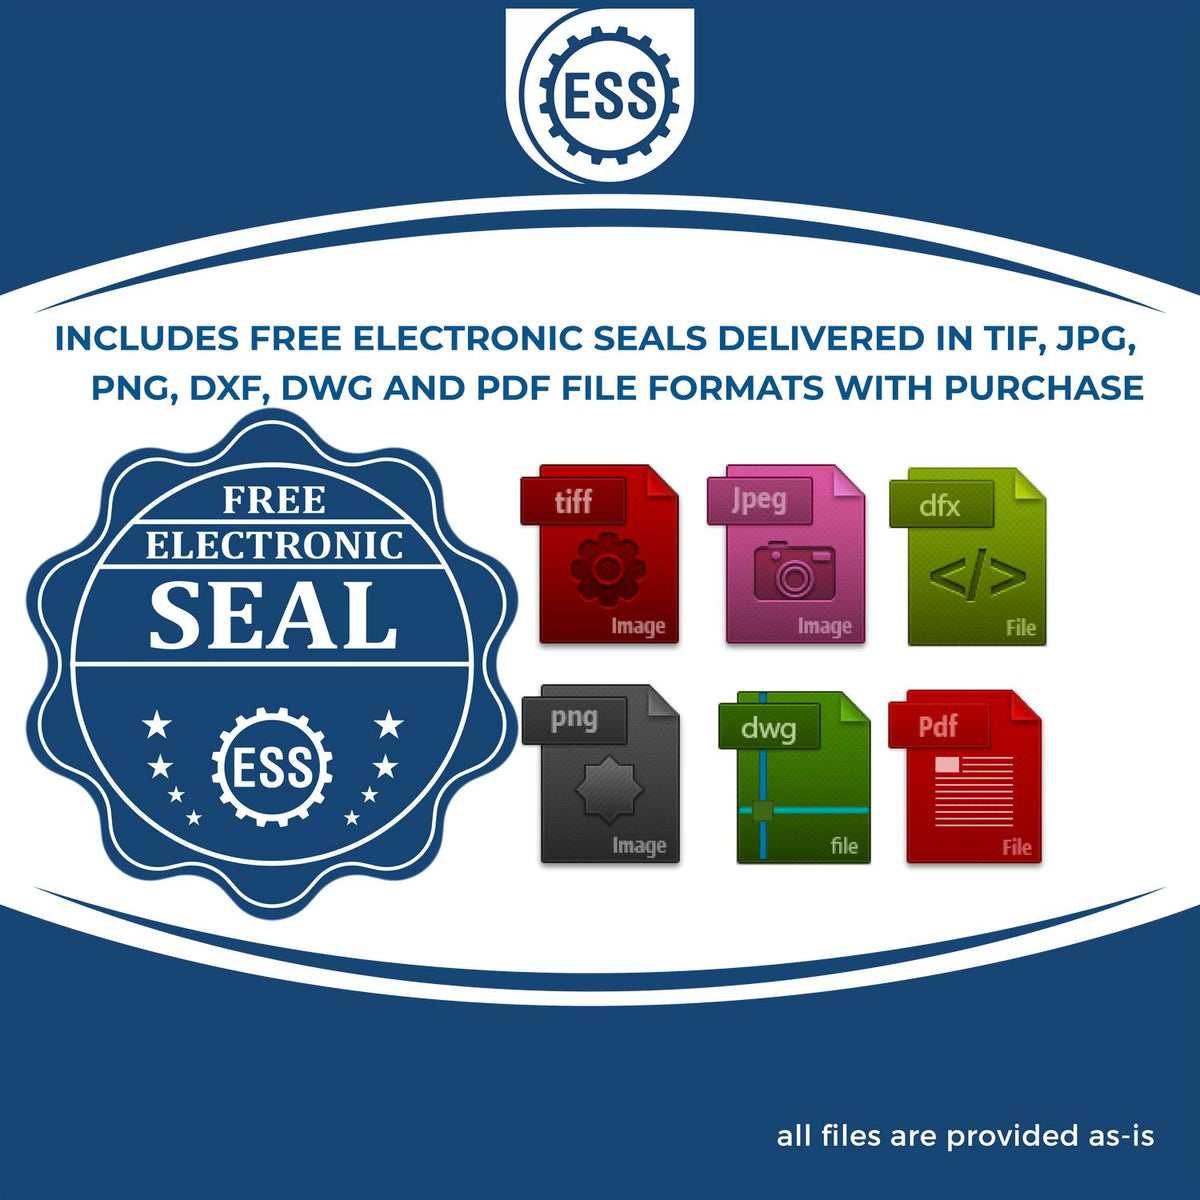 An infographic for the free electronic seal for the State of Alabama Long Reach Architectural Embossing Seal illustrating the different file type icons such as DXF, DWG, TIF, JPG and PNG.